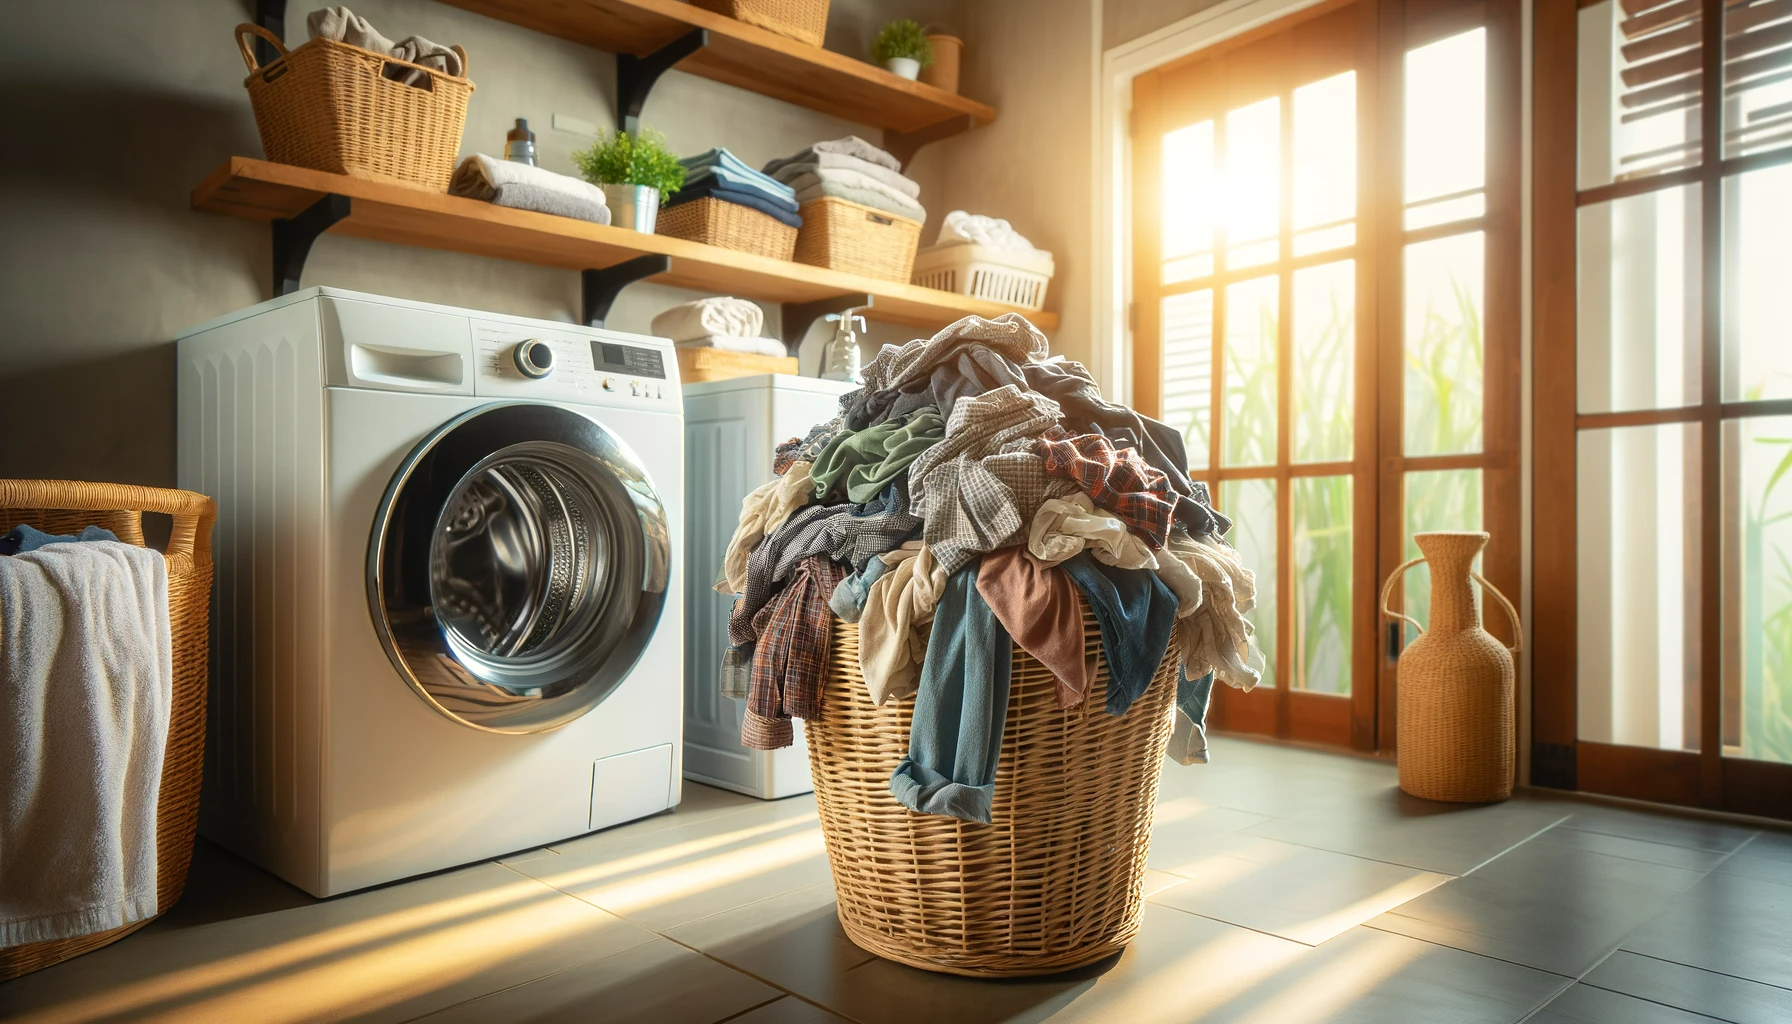 How Often Should You Wash Clothes To Keep Them Clean & Fresh?